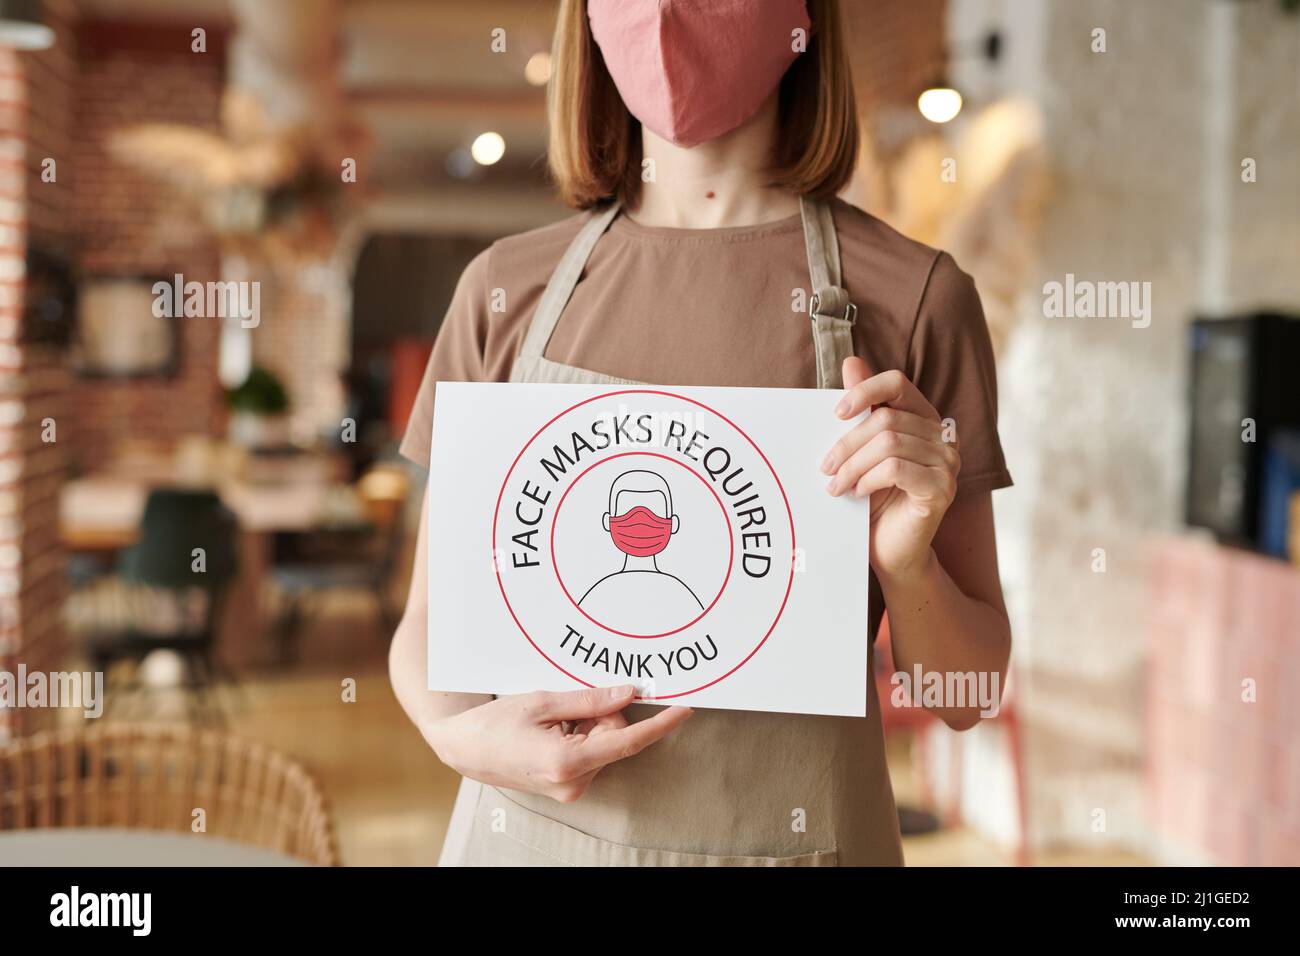 Horizontal shot of unrecognizable cafe worker standing alone holding Face Mask Required sign Stock Photo